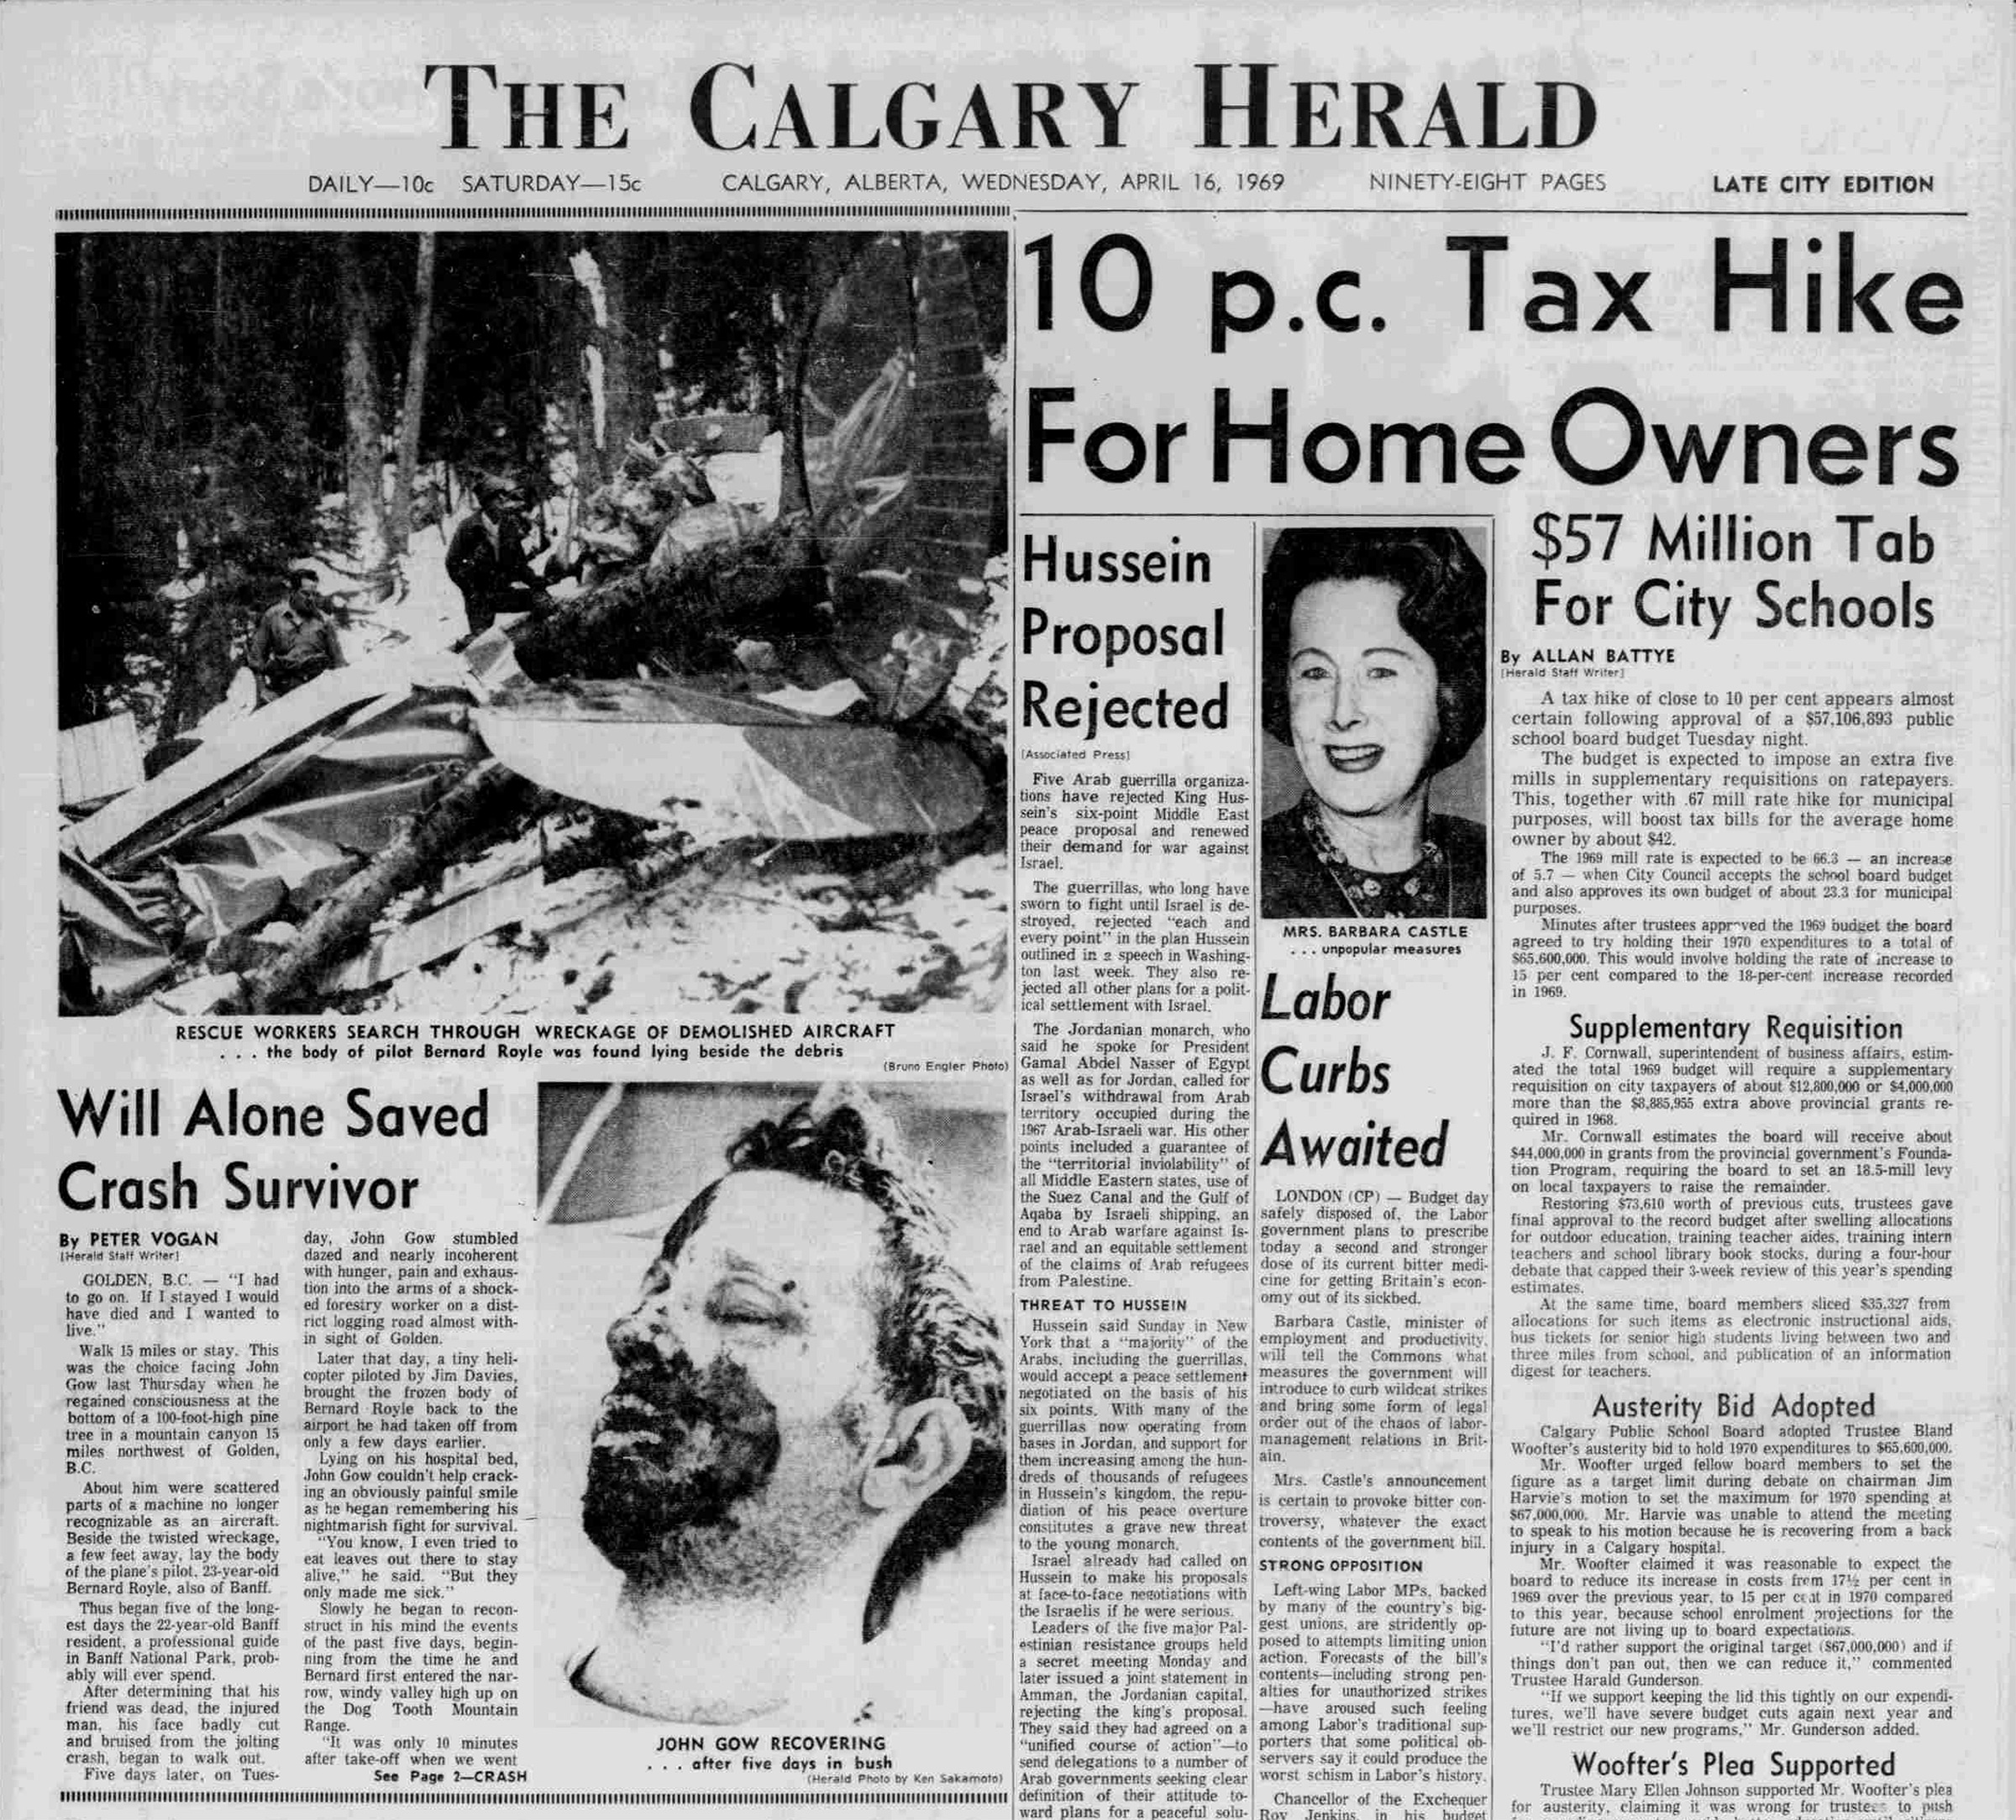 The front page of The Calgary Herald (cropped), April 16, 1969